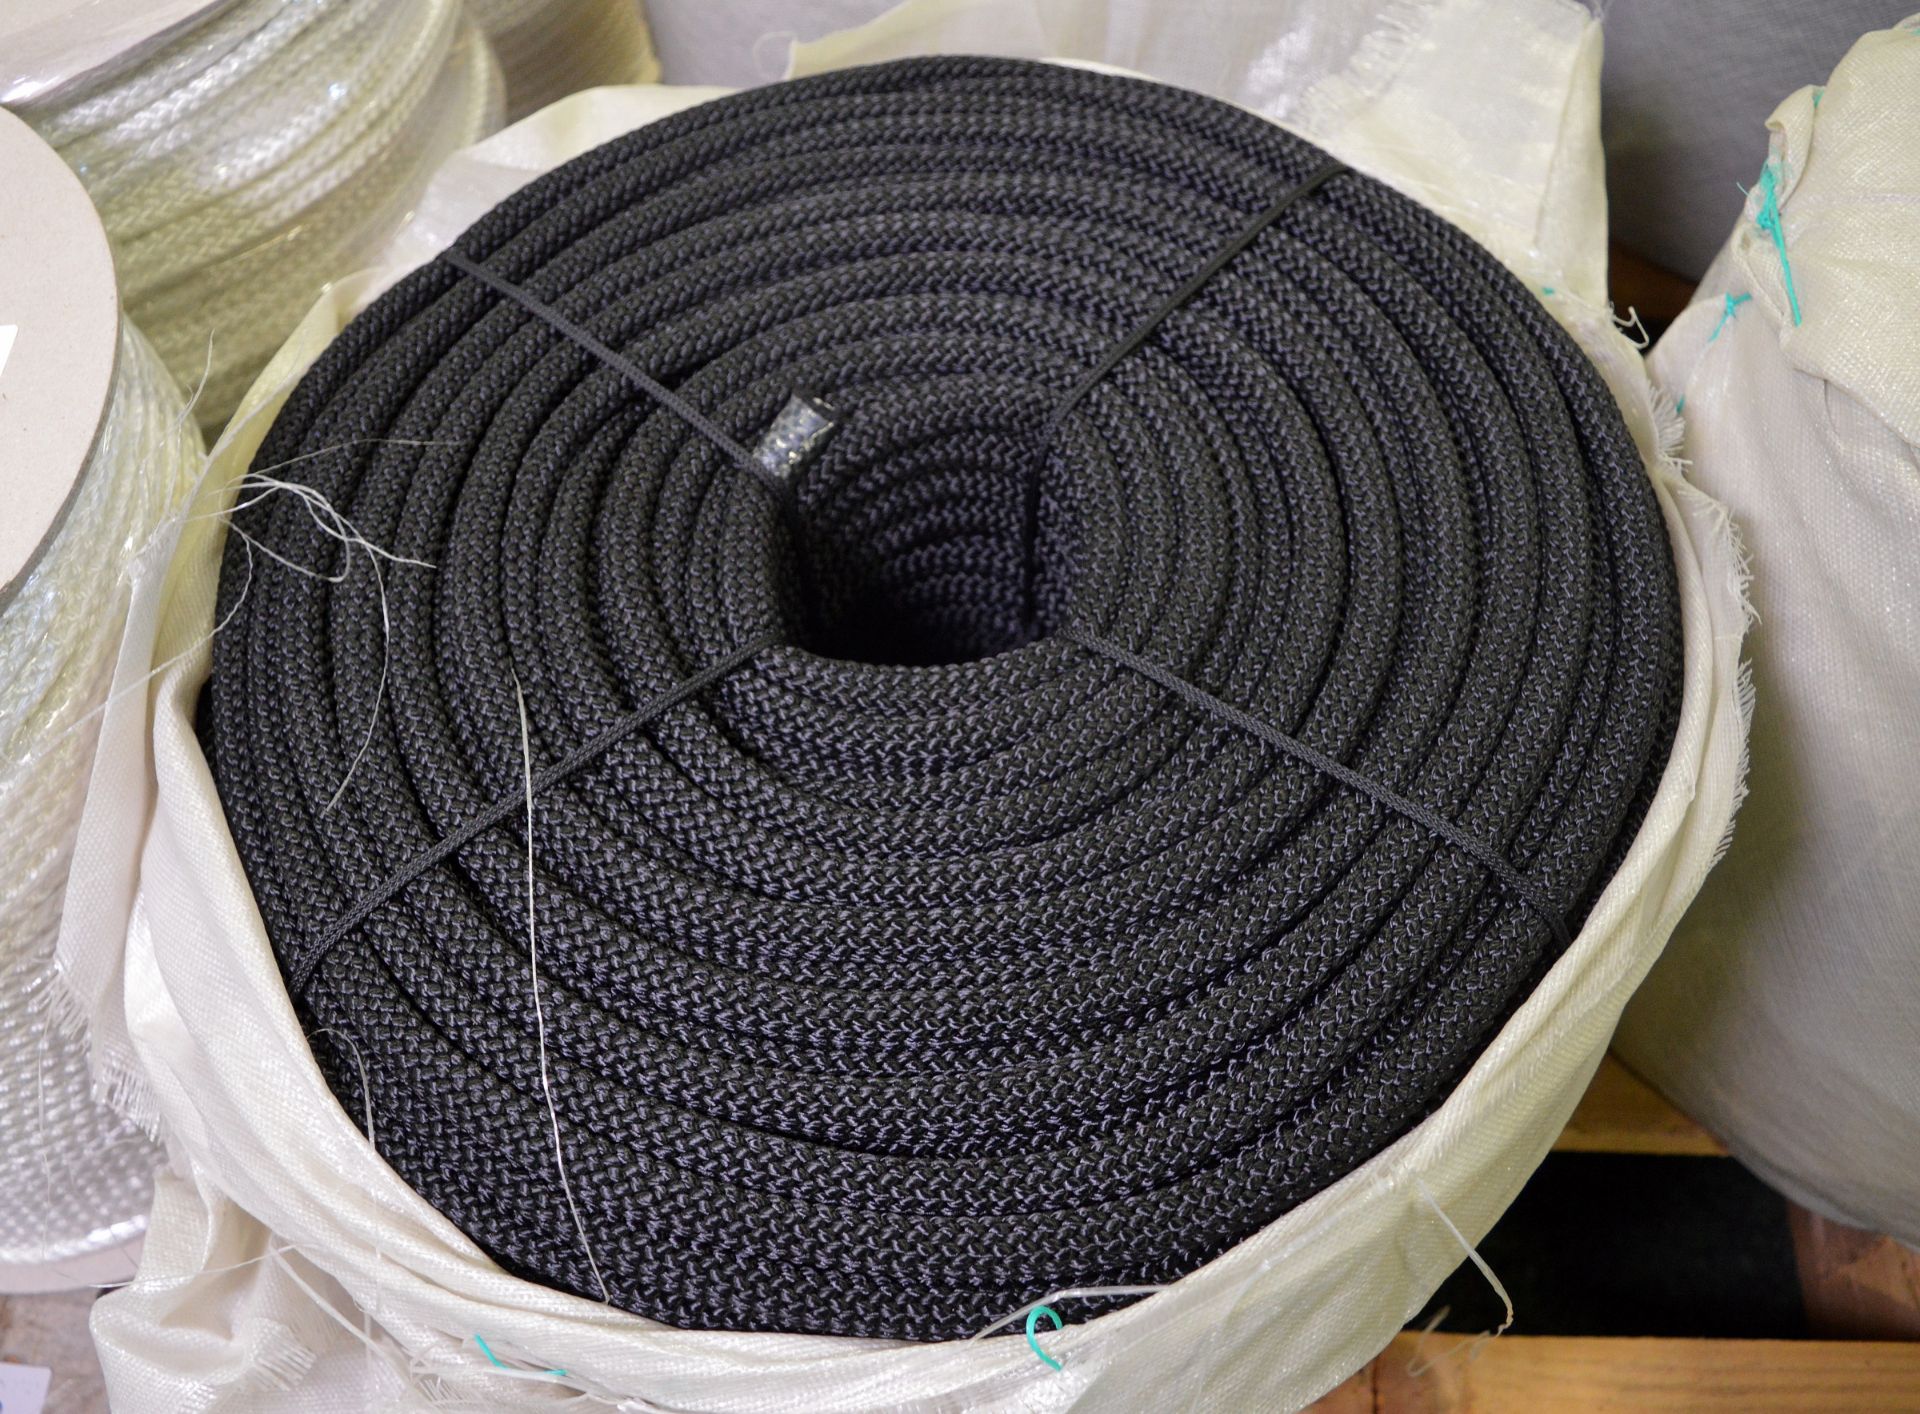 Black Abseil Rope 220M x 11mm - NSN 4020-99-789-3539 - Image 3 of 4